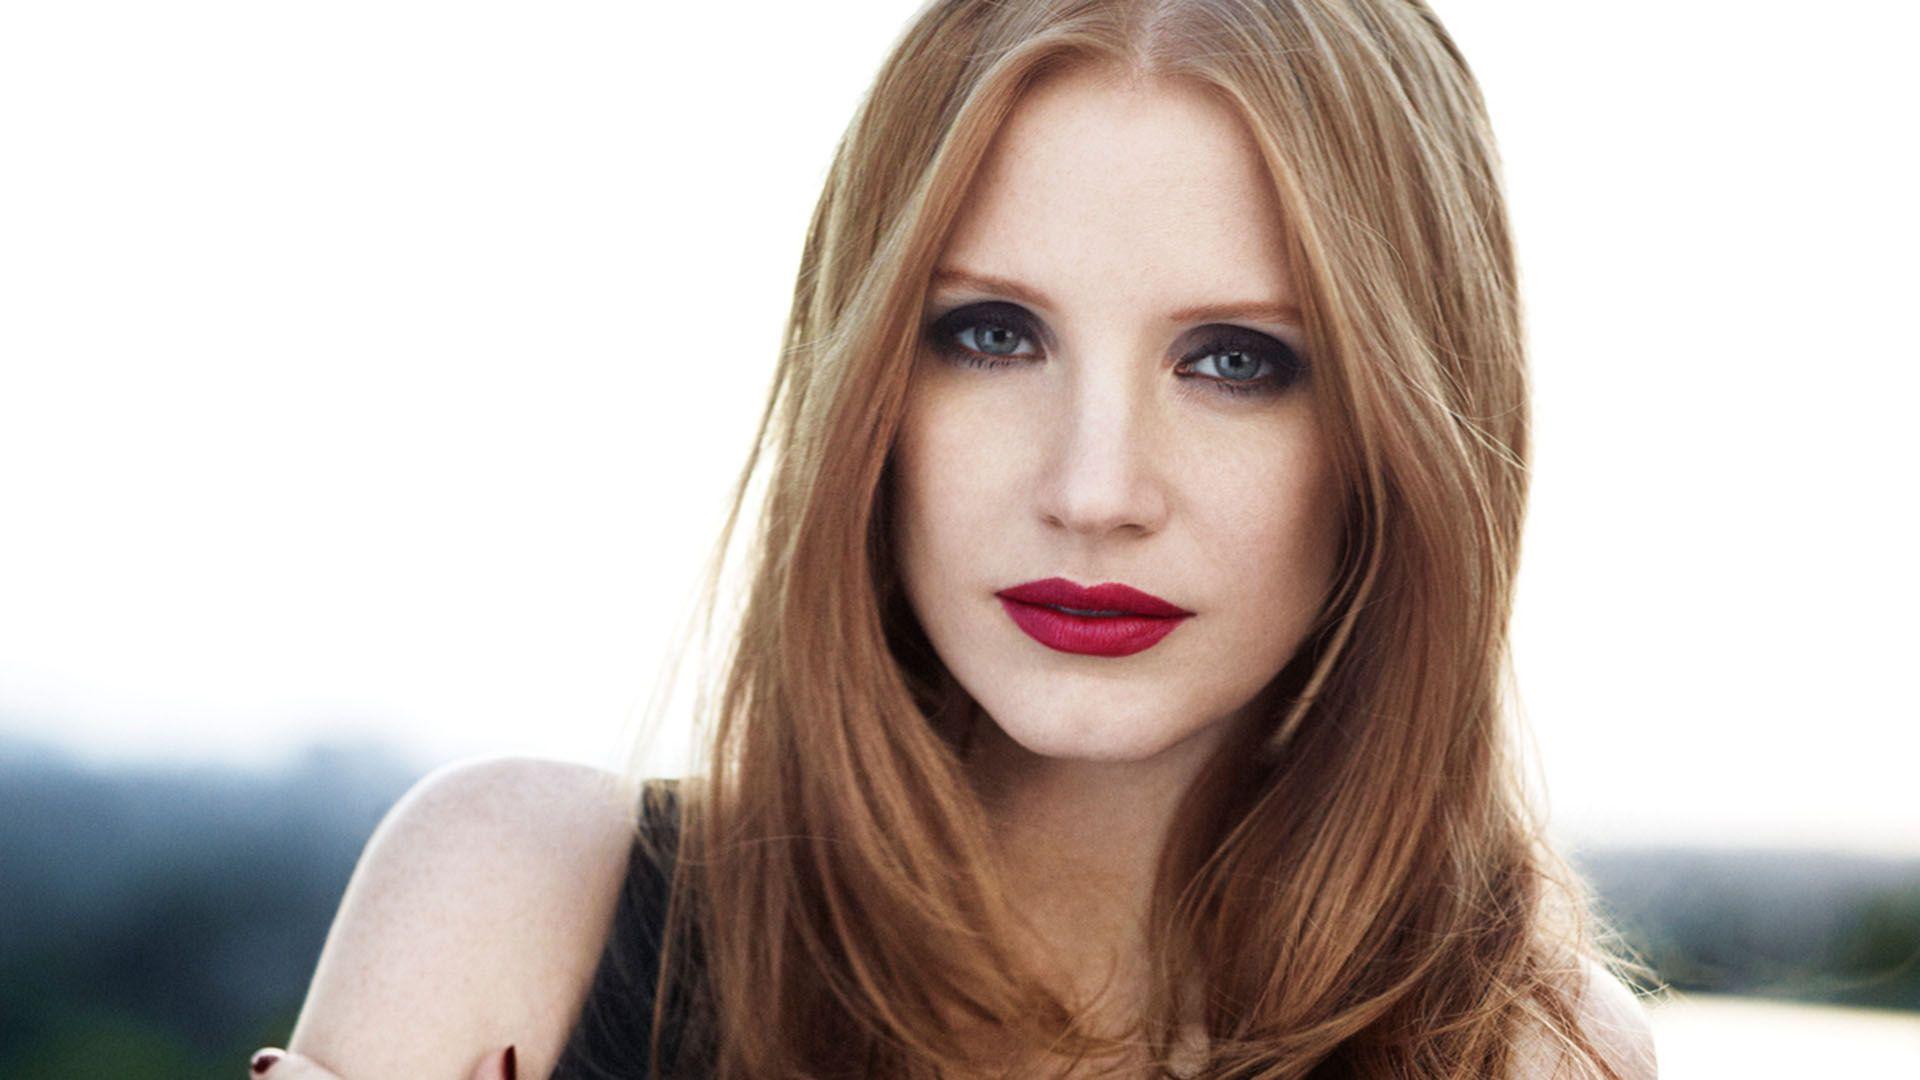 Jessica Chastain Wallpaper, 44 Jessica Chastain Android